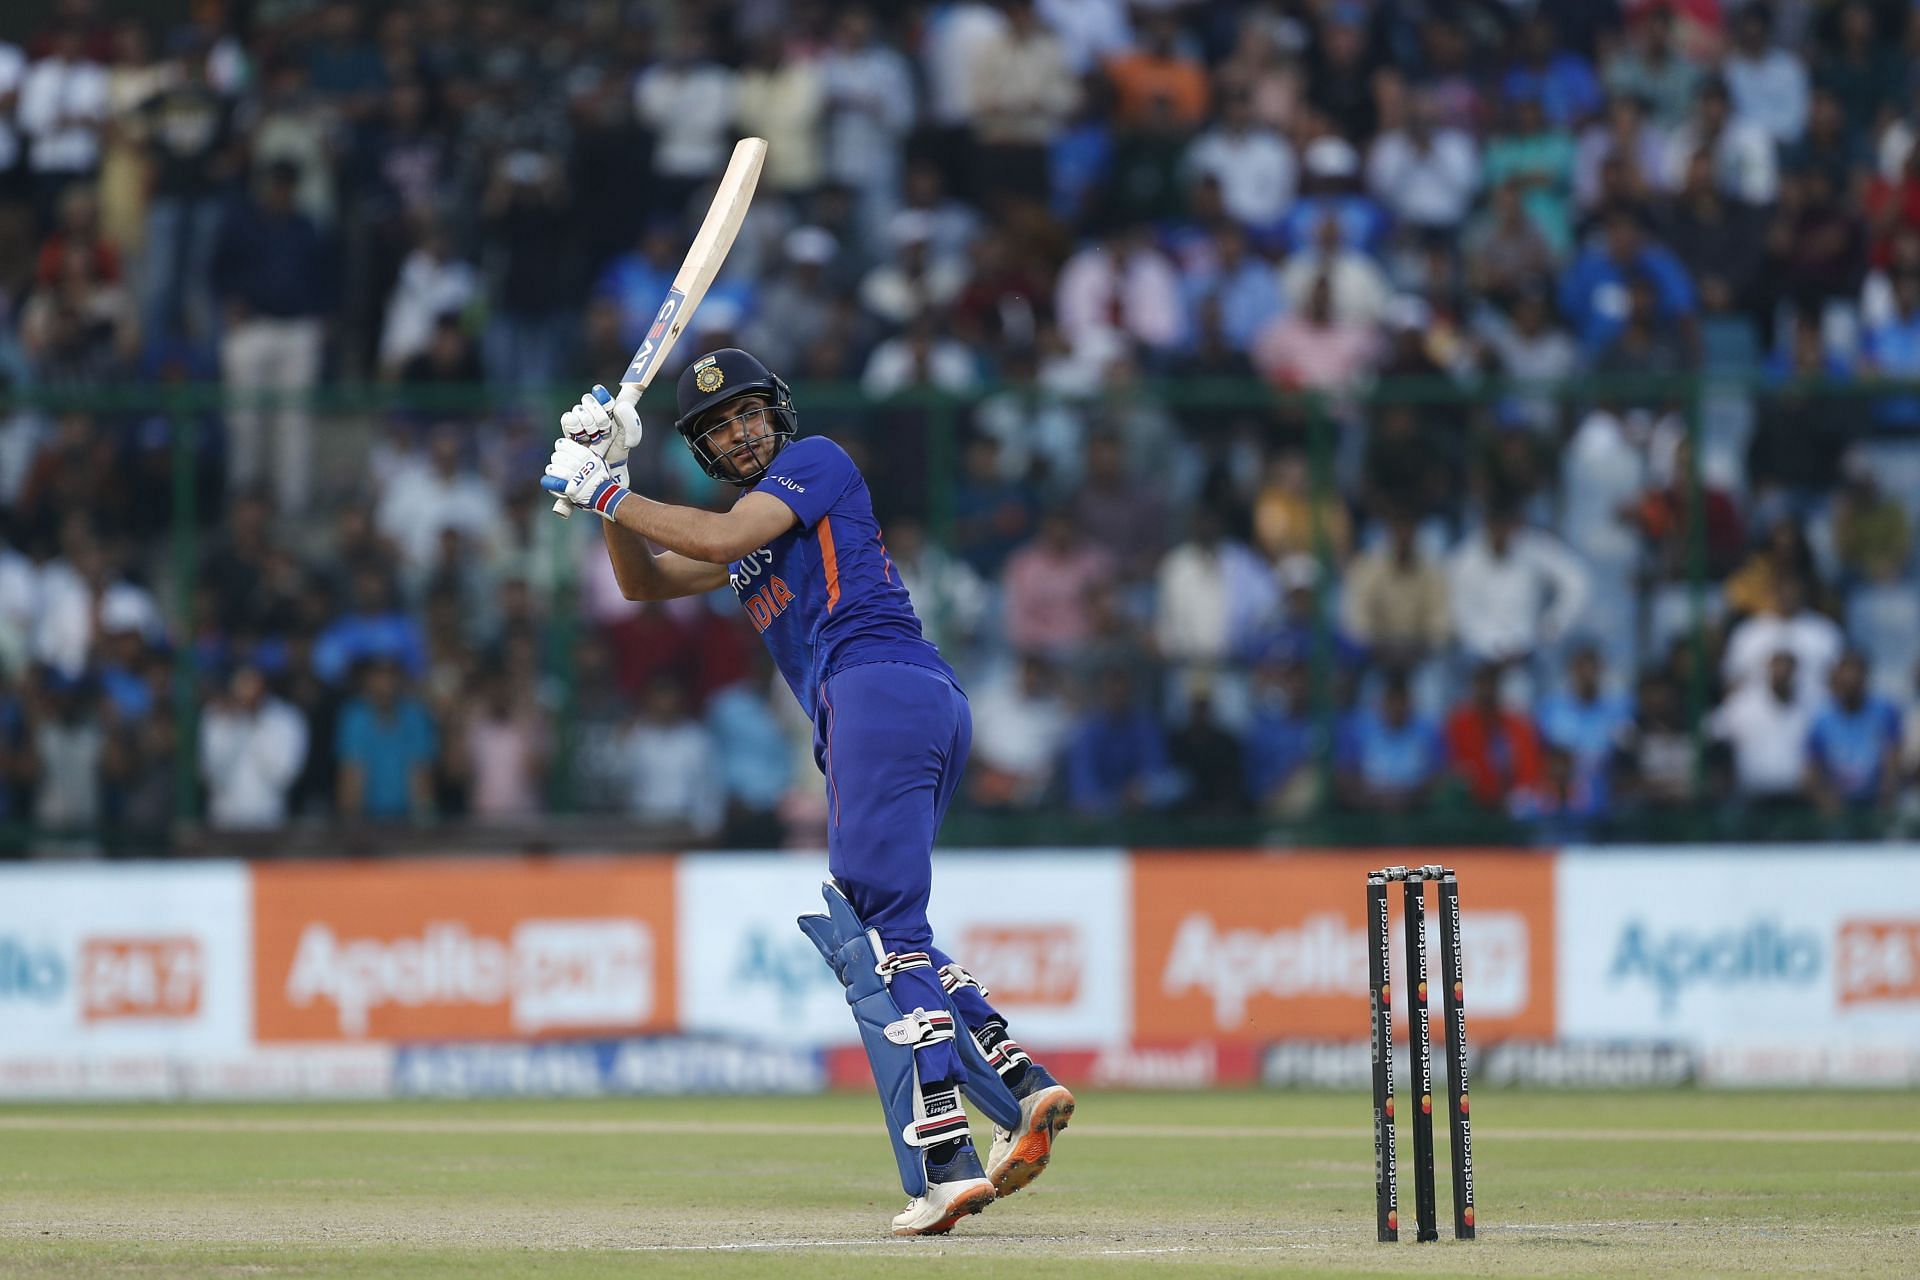 Shubman Gill has staked his claim in the Indian ODI team [Pic Credit: Getty Images]